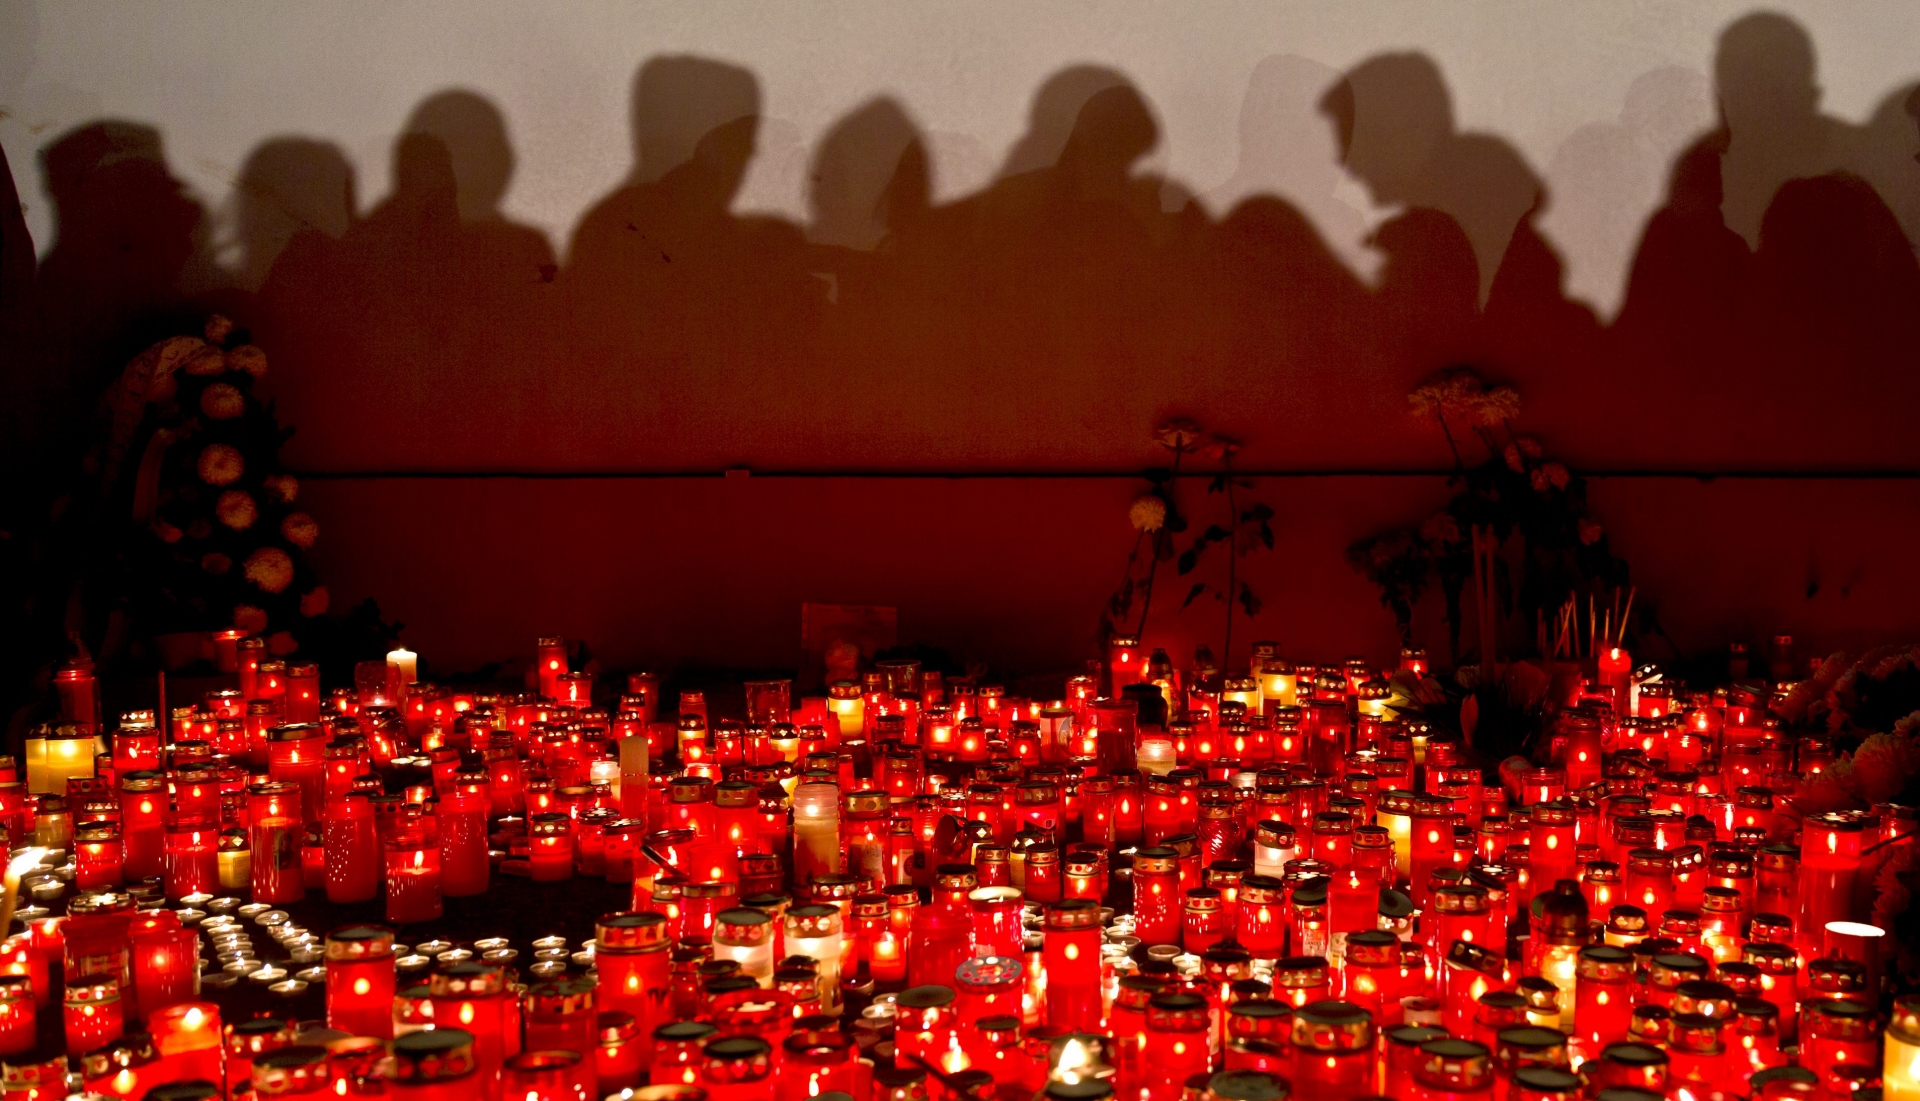 People cast shadows on a wall as they wait to light candles and lay flowers outside the compound that housed the nightclub where a fire occurred in the early morning hours in Bucharest, Romania, Saturday, Oct. 31, 2015. Hundreds of young people had gone clubbing at the hip Colectiv nightclub Friday night to enjoy a free concert by the Goodbye to Gravity metal band but the evening ended in horror, as the inferno caused a panic that killed tens of people and injured many others.(AP Photo/Vadim Ghirda)